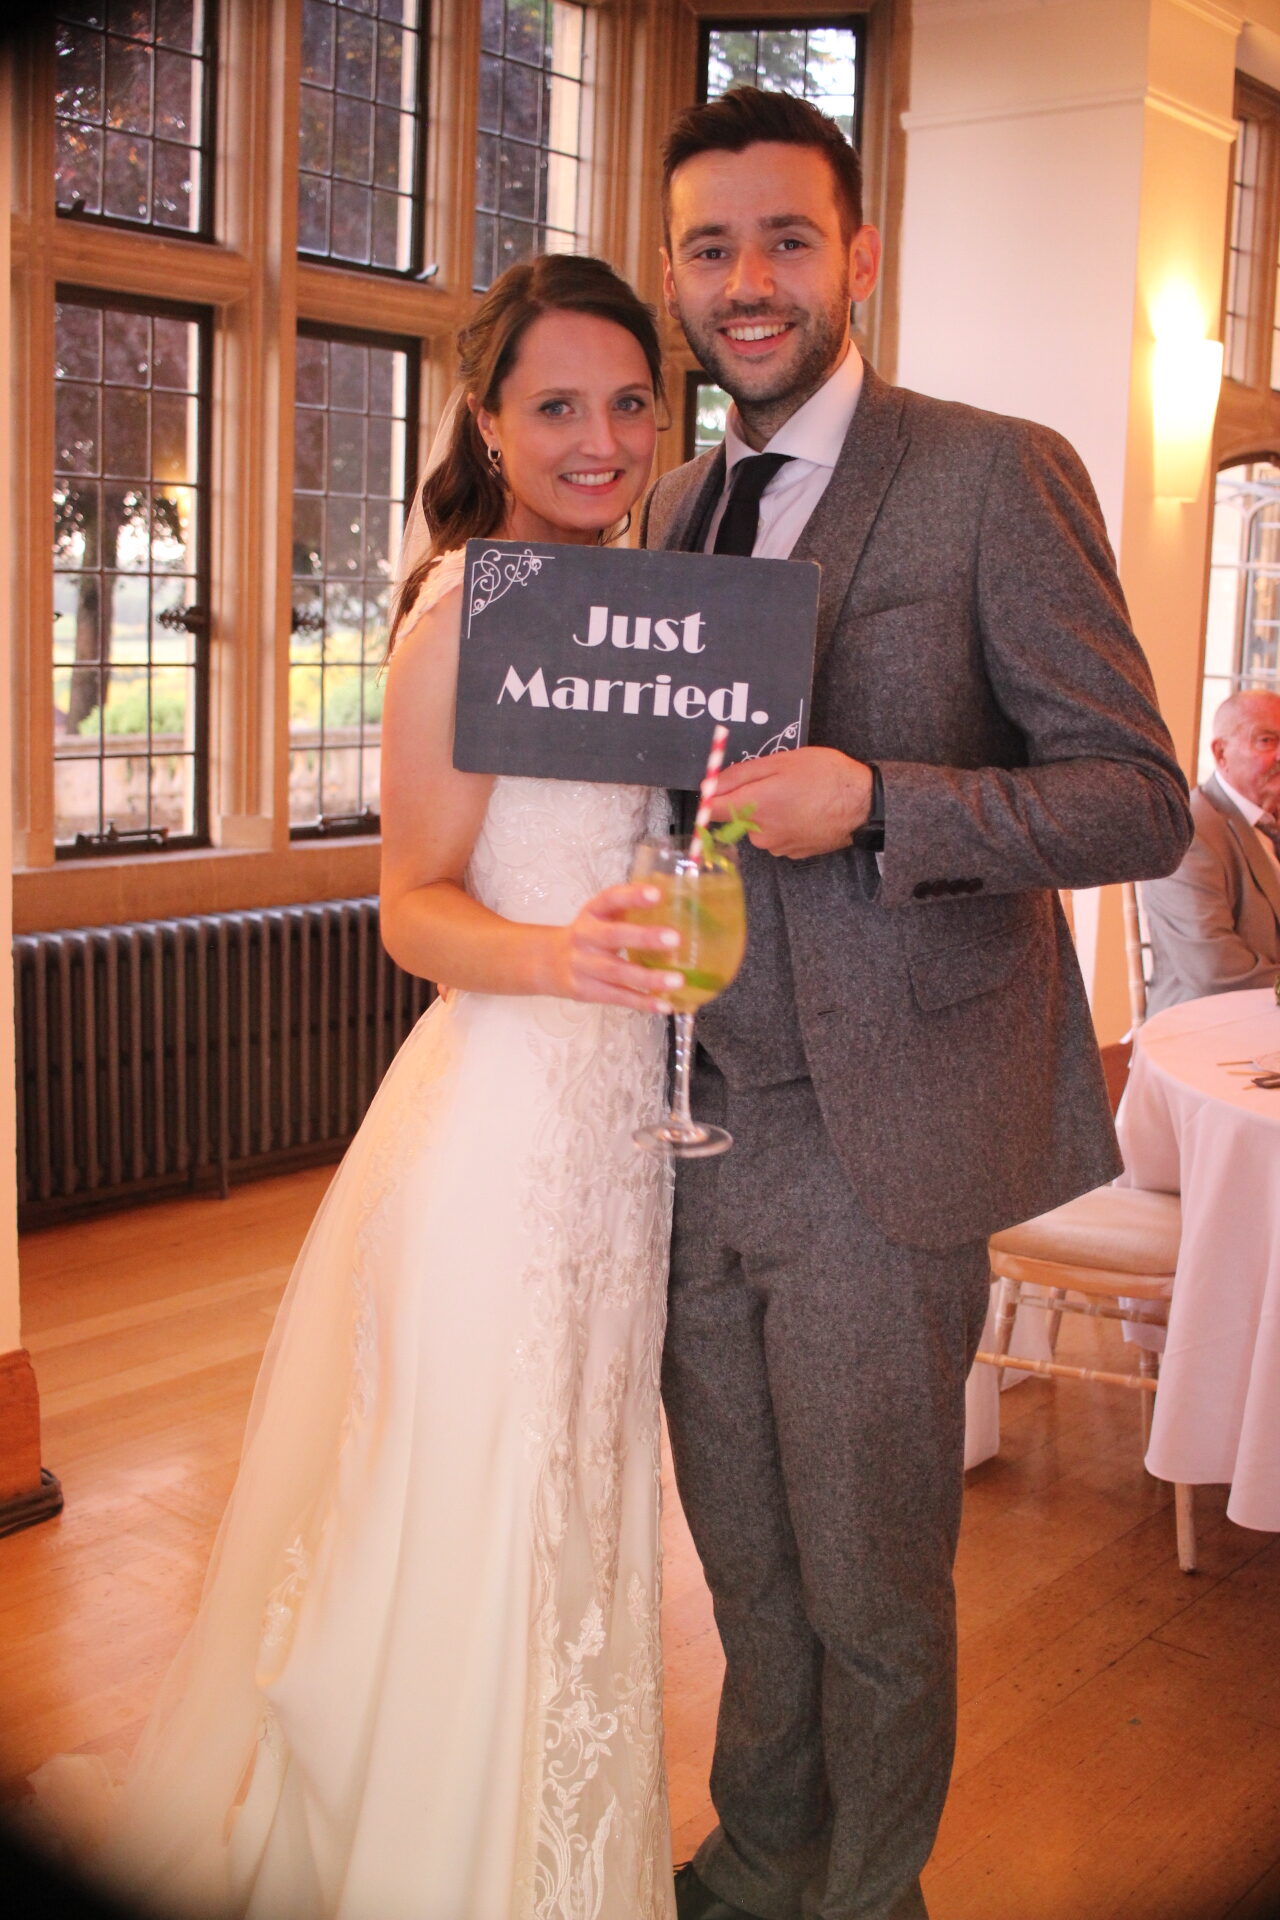 The happy couple at Coombe Lodge